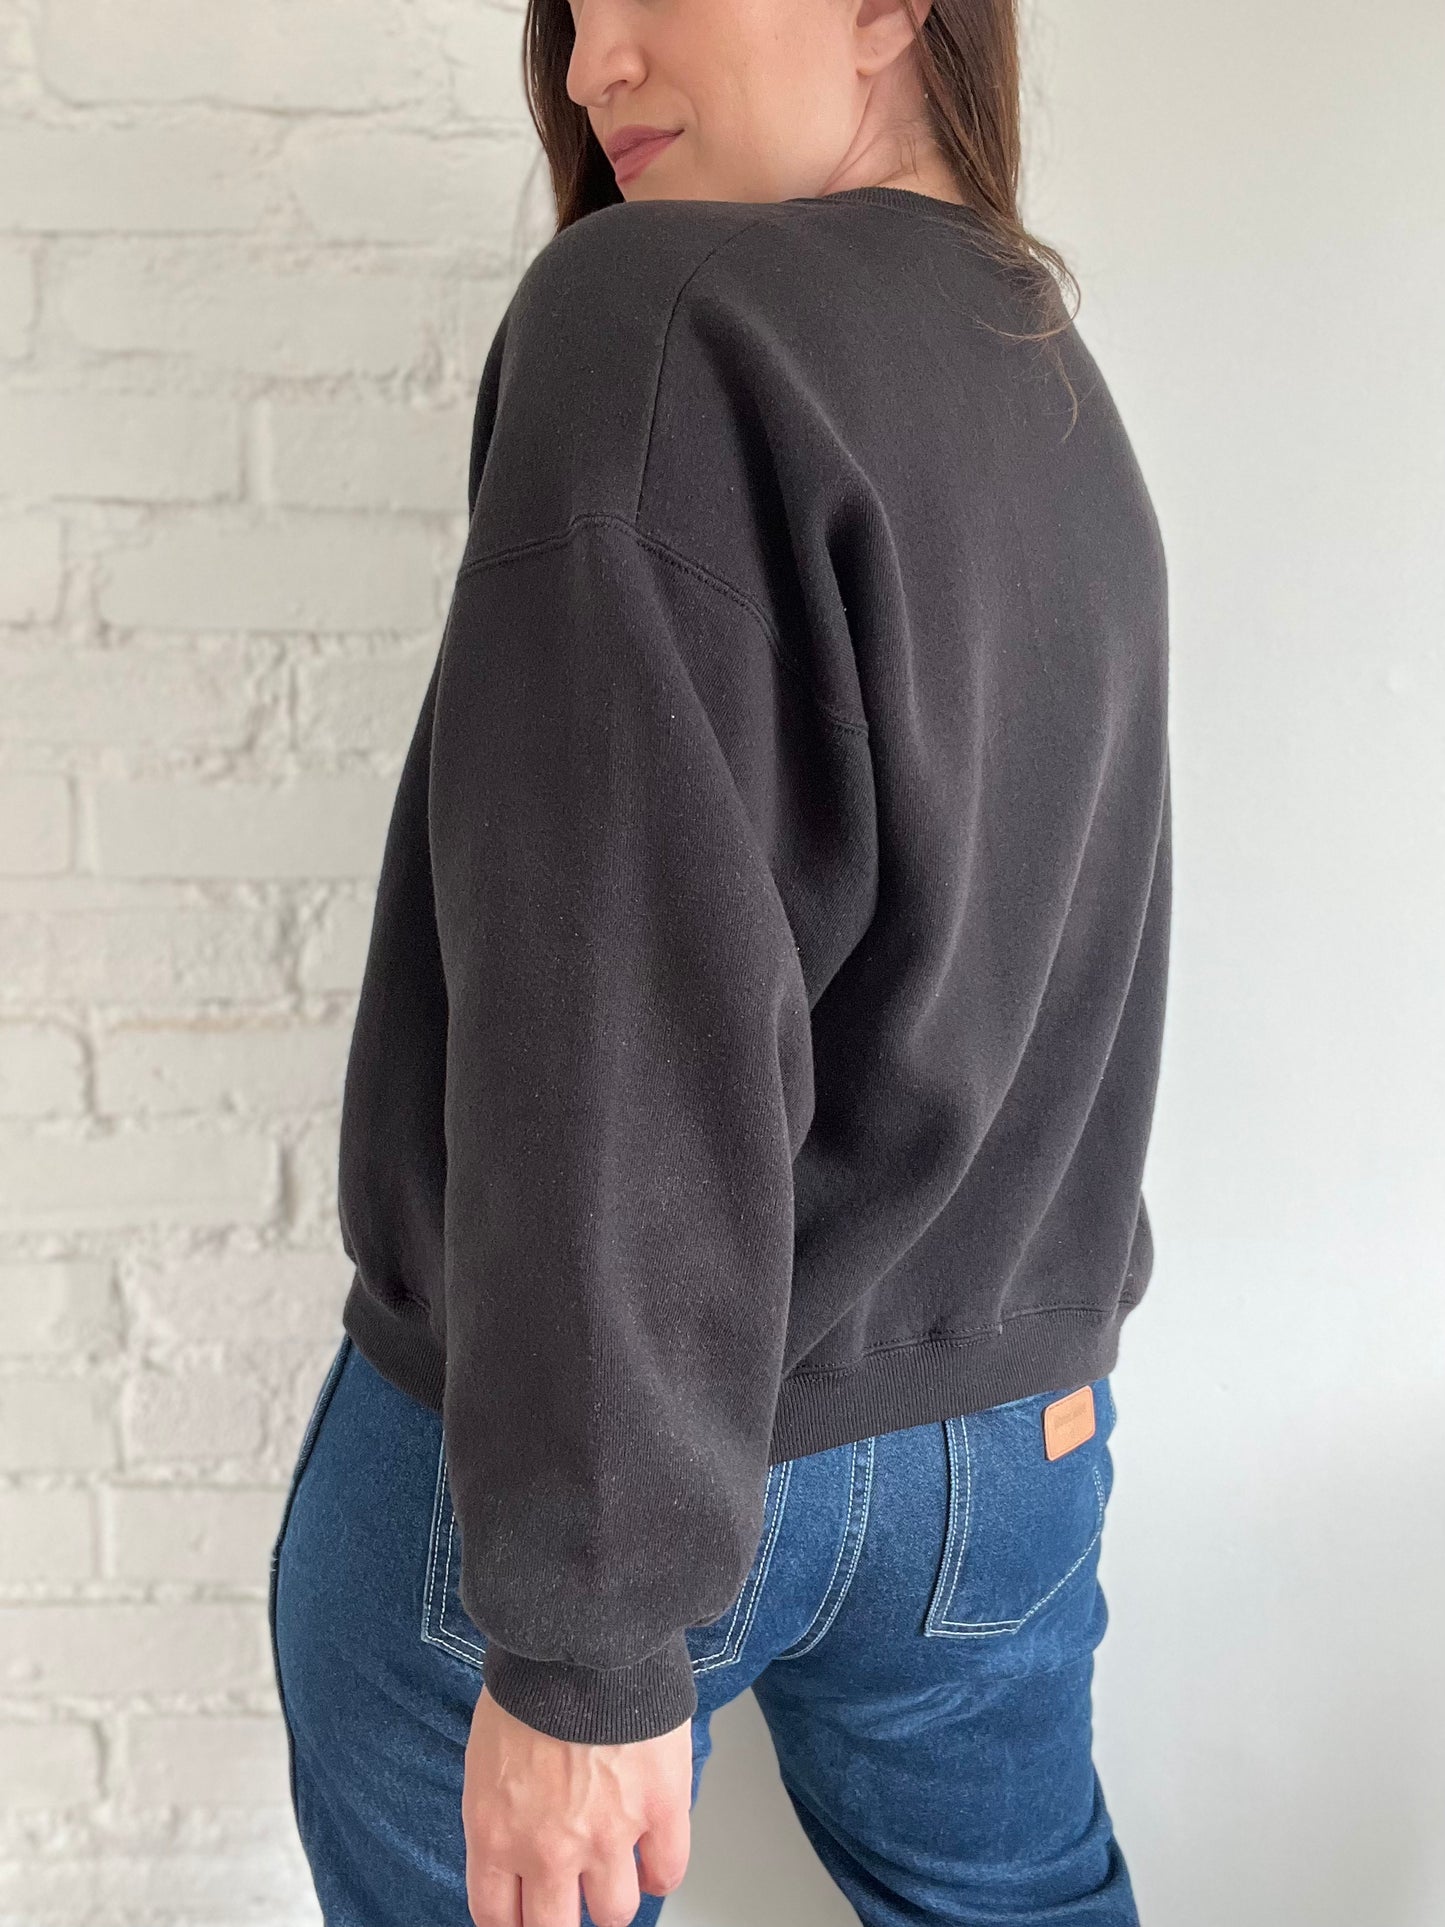 Quilted Lee Heavyweight Sweater - L/XL